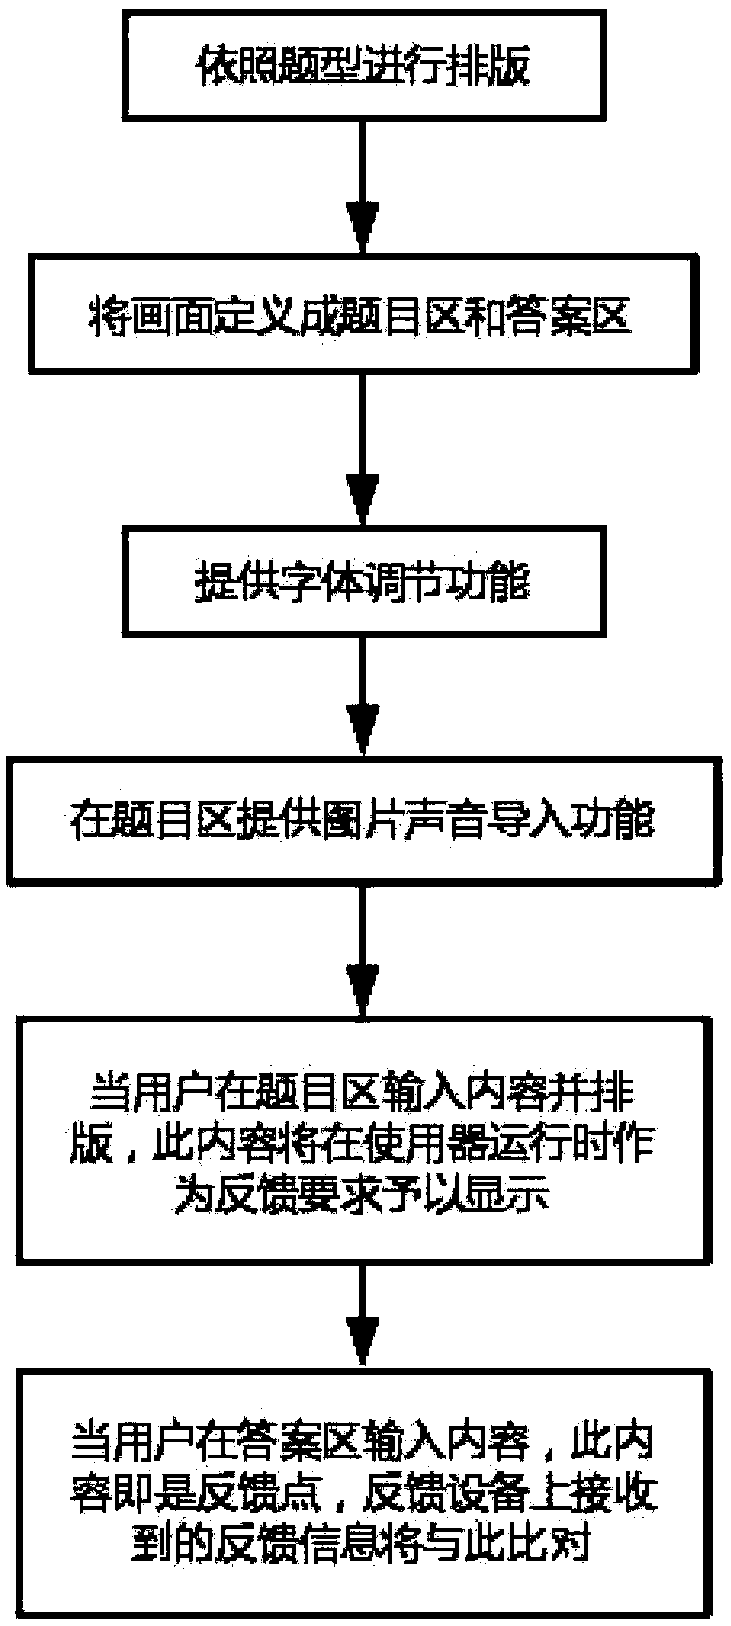 Classroom instant feedback content generation method and system